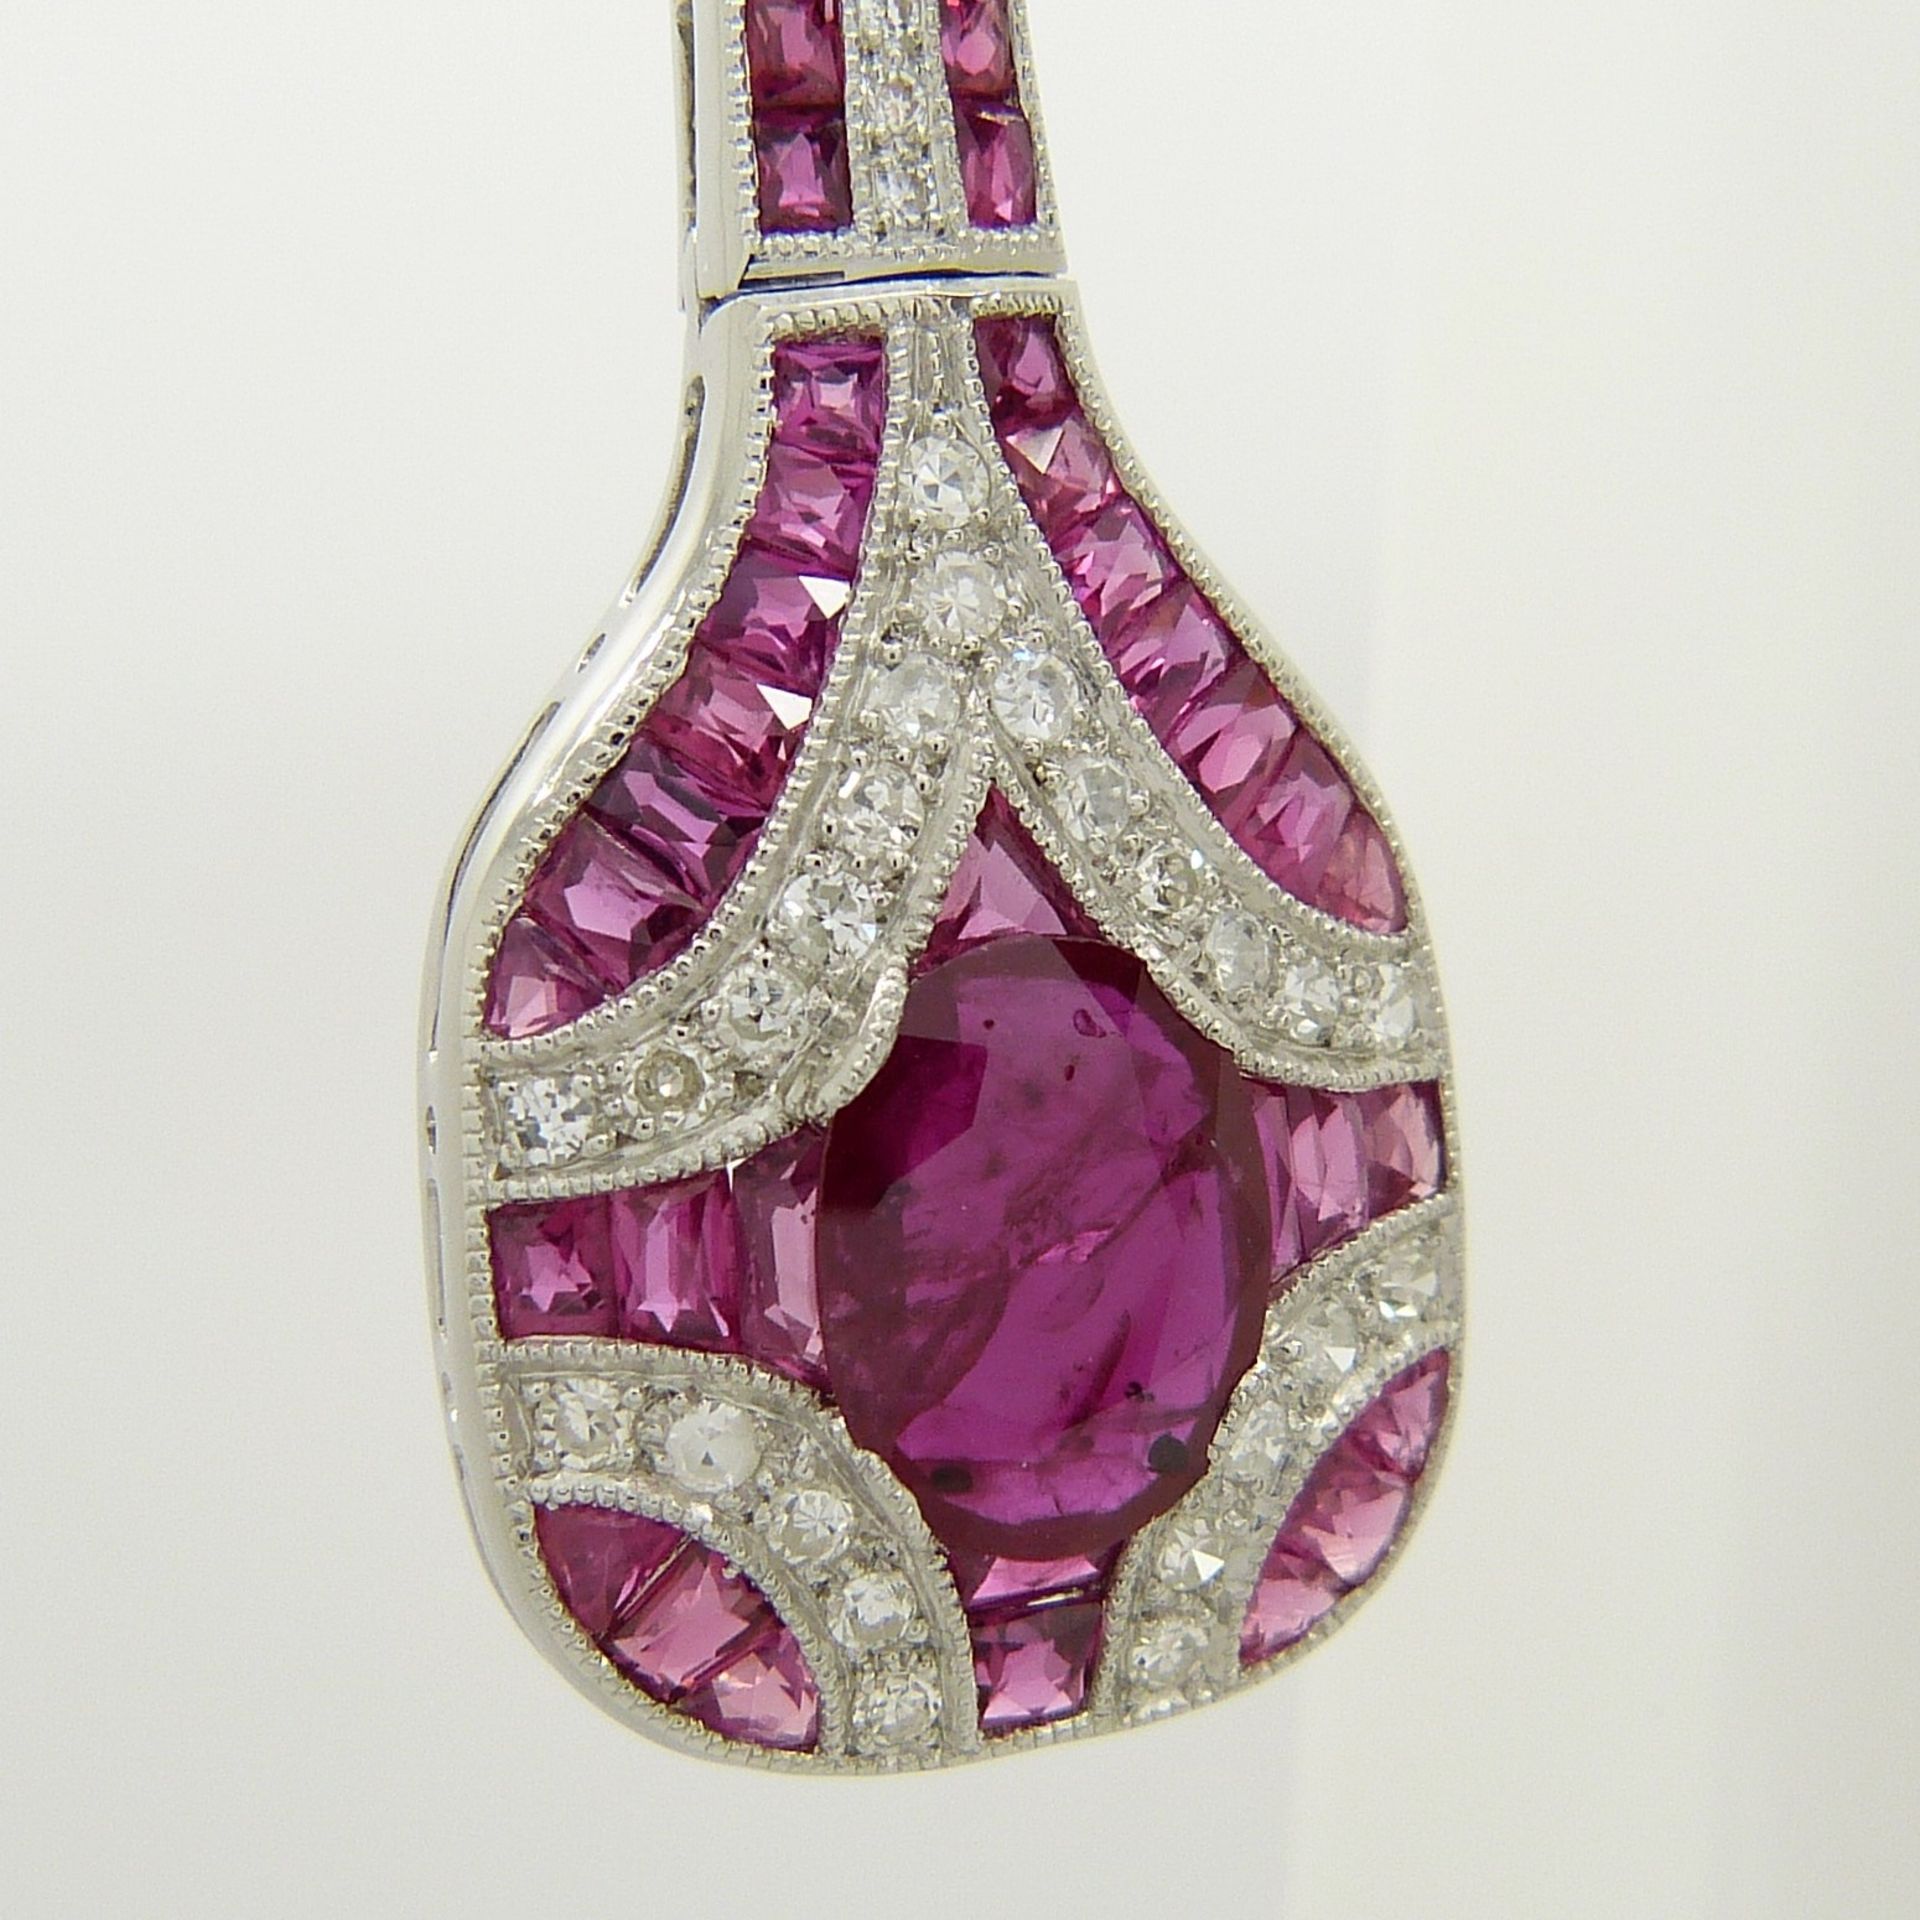 Long platinum Art Deco-style drop earrings set with rubies and diamonds - Image 5 of 9